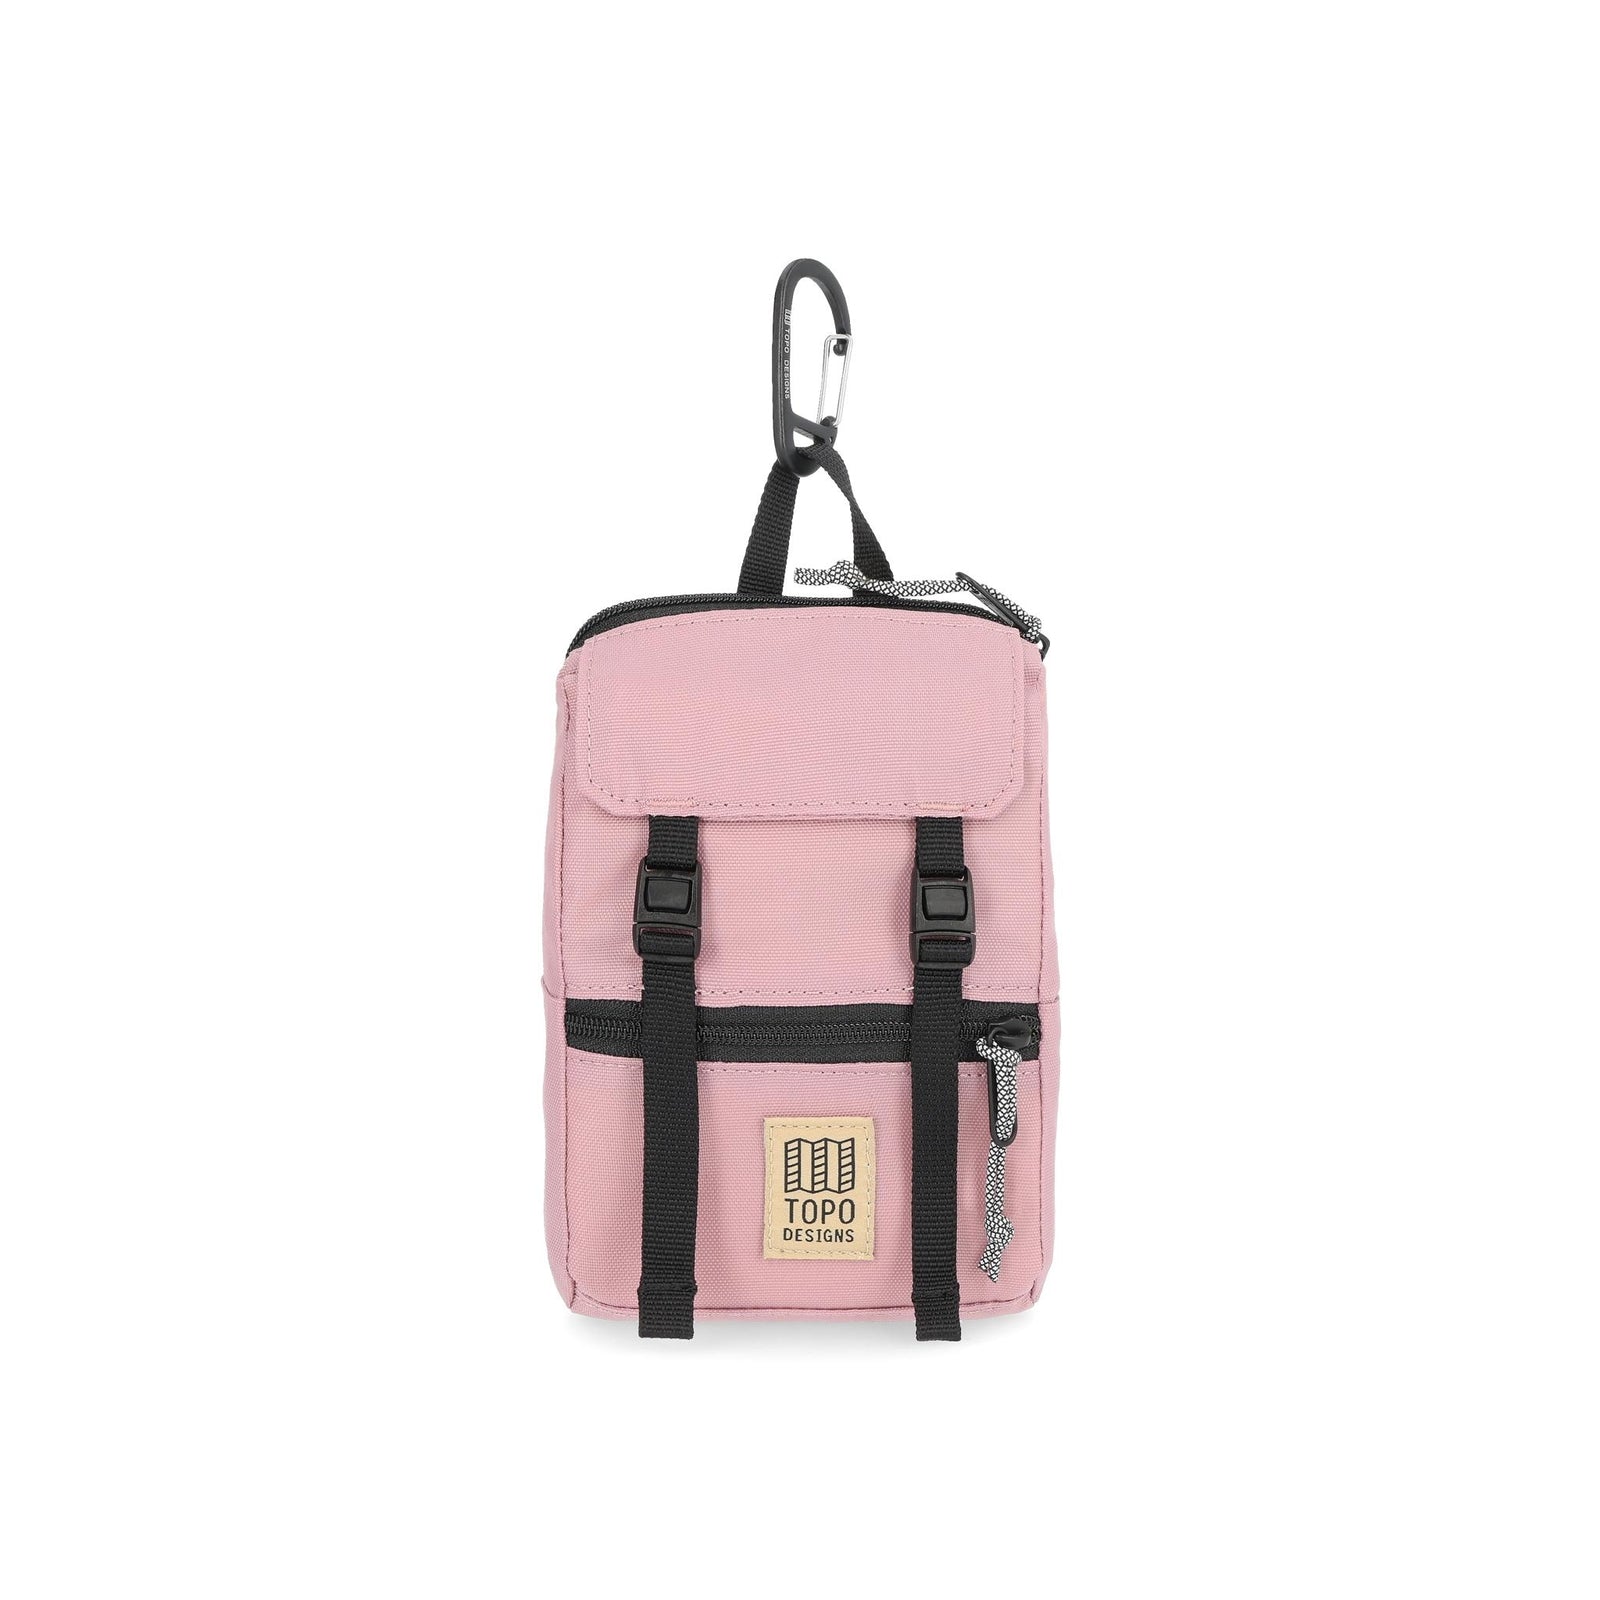 Front View of Topo Designs Rover Pack Micro in "Rose"